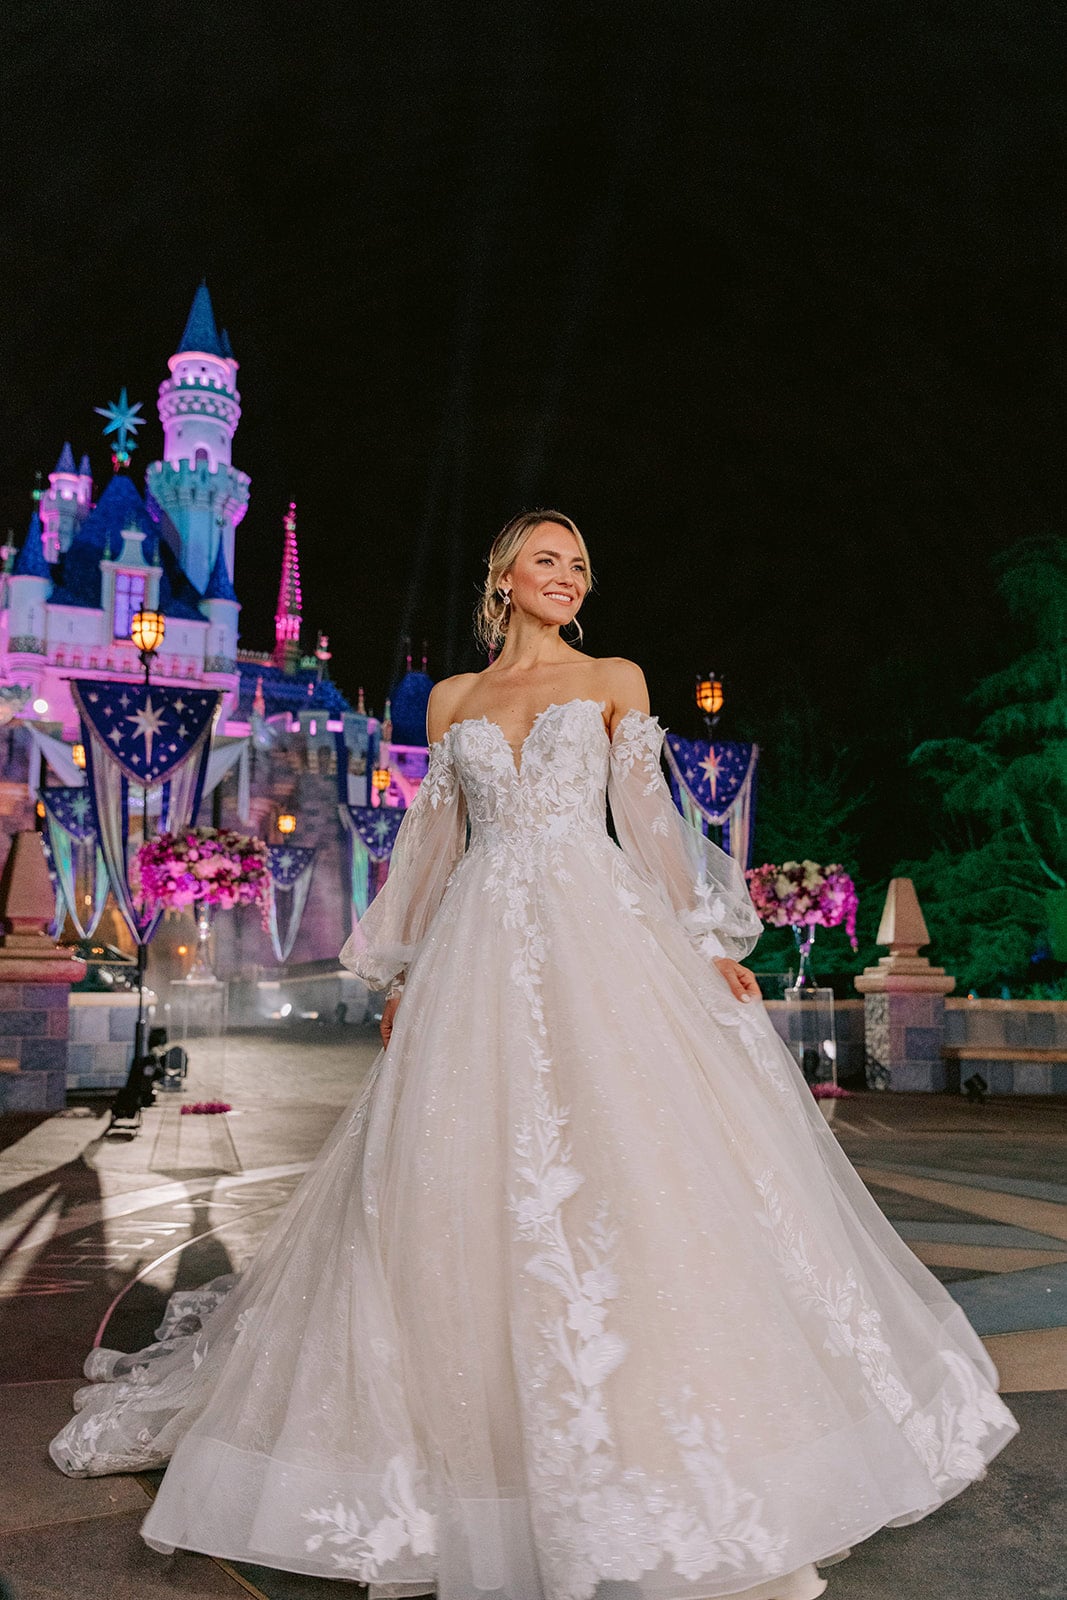 15 Best Disney Wedding Gifts For Fairytale Couples (2023)